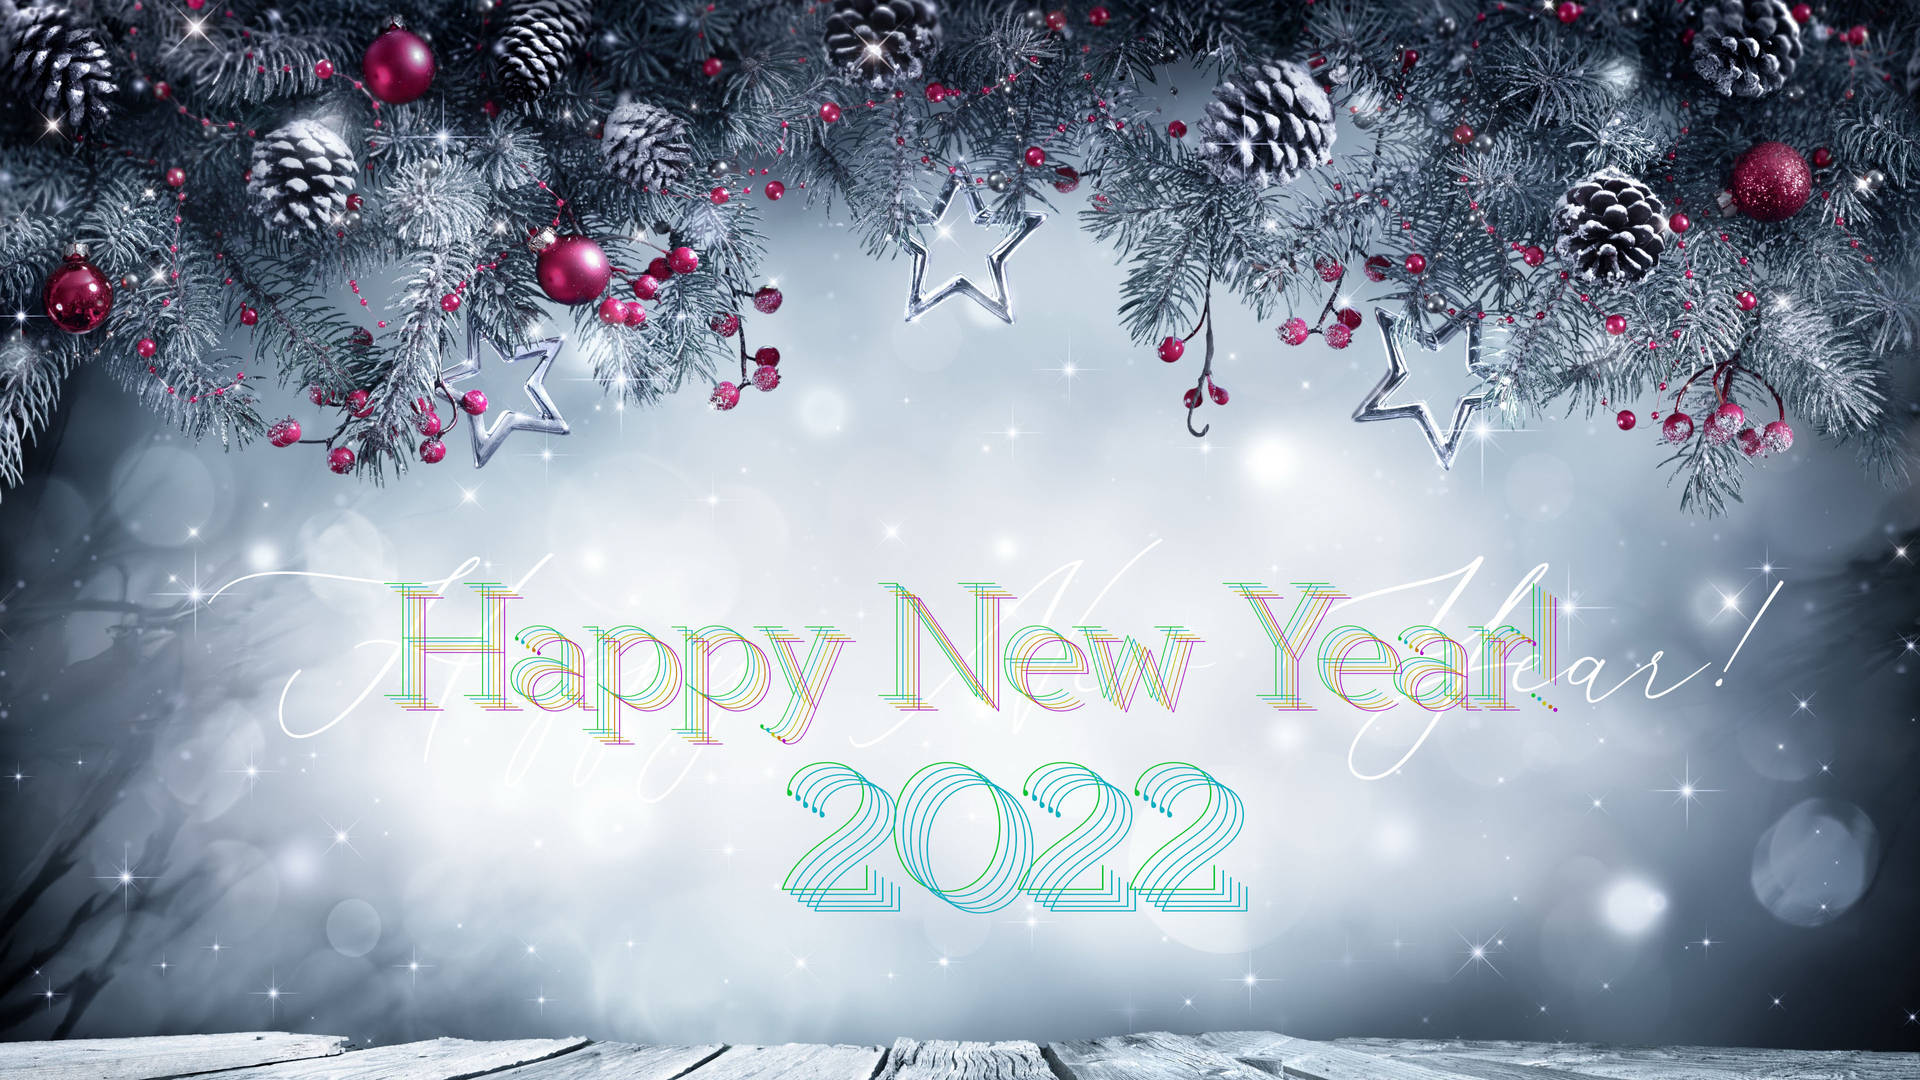 Ringing In 2022 With Style - A Spectacular New Year's Celebration